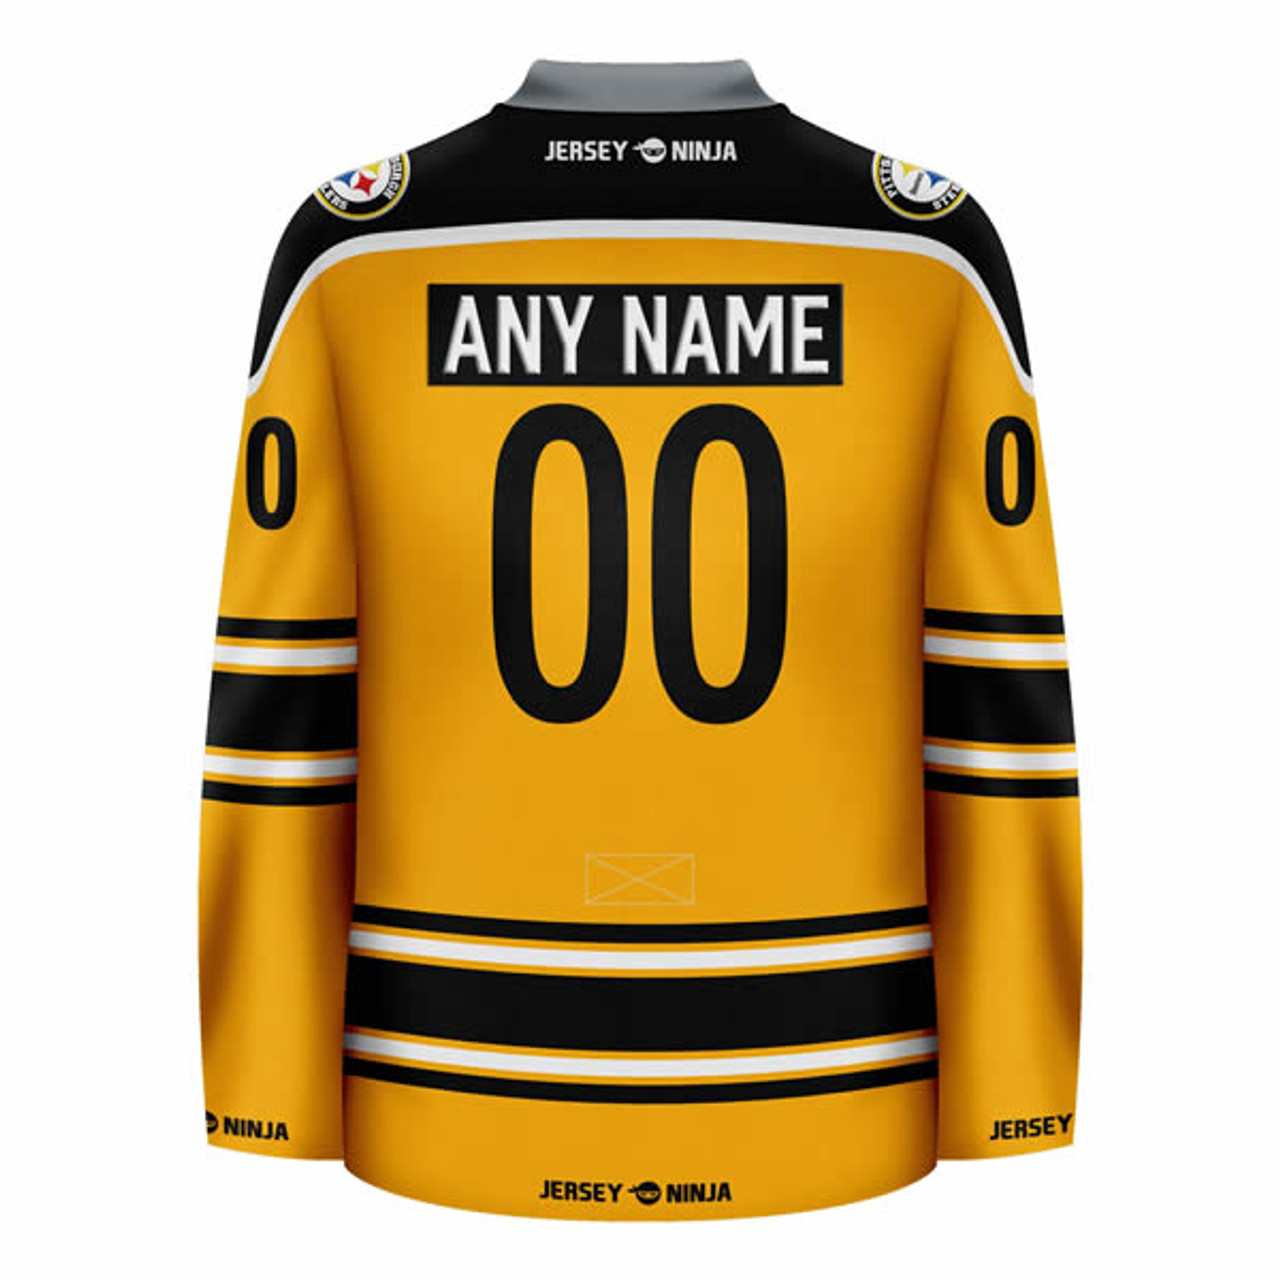 These Pittsburgh Steelers concept hockey jerseys are unreal